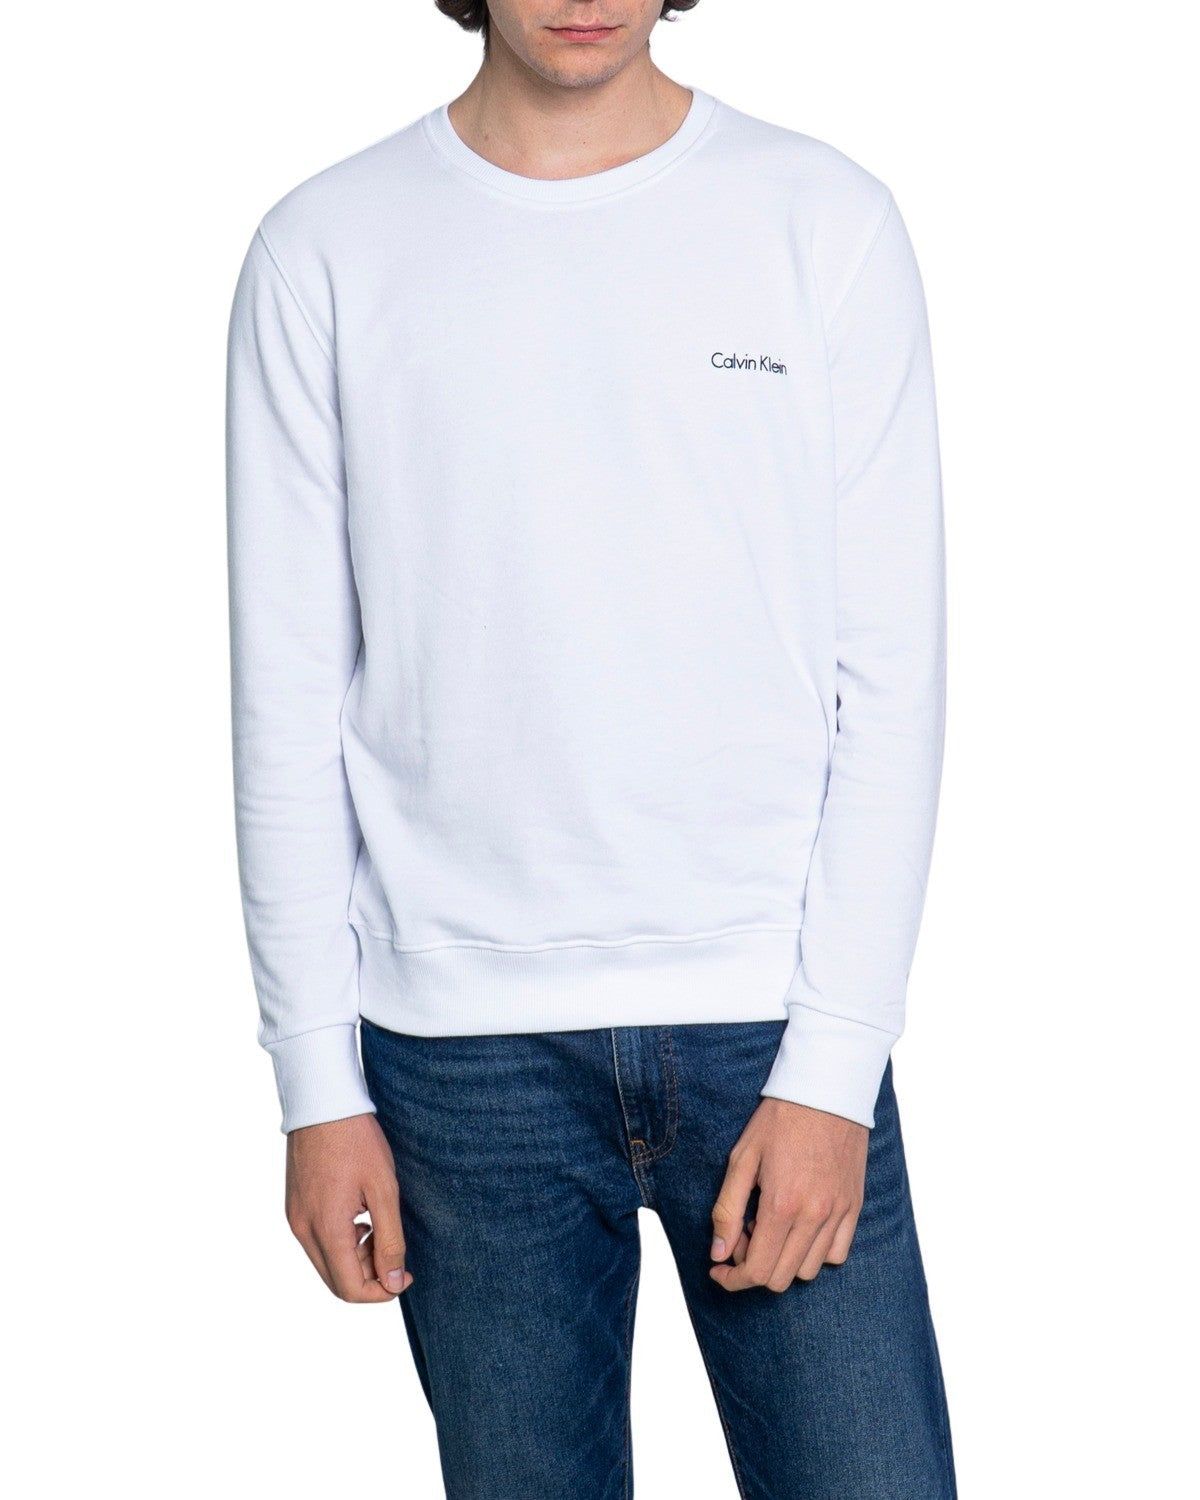 Brand: Calvin Klein Jeans Gender: Men Type: Sweatshirts Season: Spring/Summer  PRODUCT DETAIL • Color: white • Pattern: plain • Fastening: slip on • Sleeves: long • Neckline: round neck  COMPOSITION AND MATERIAL • Composition: -100% cotton  •  Washing: machine wash at 30° -100% Cotton